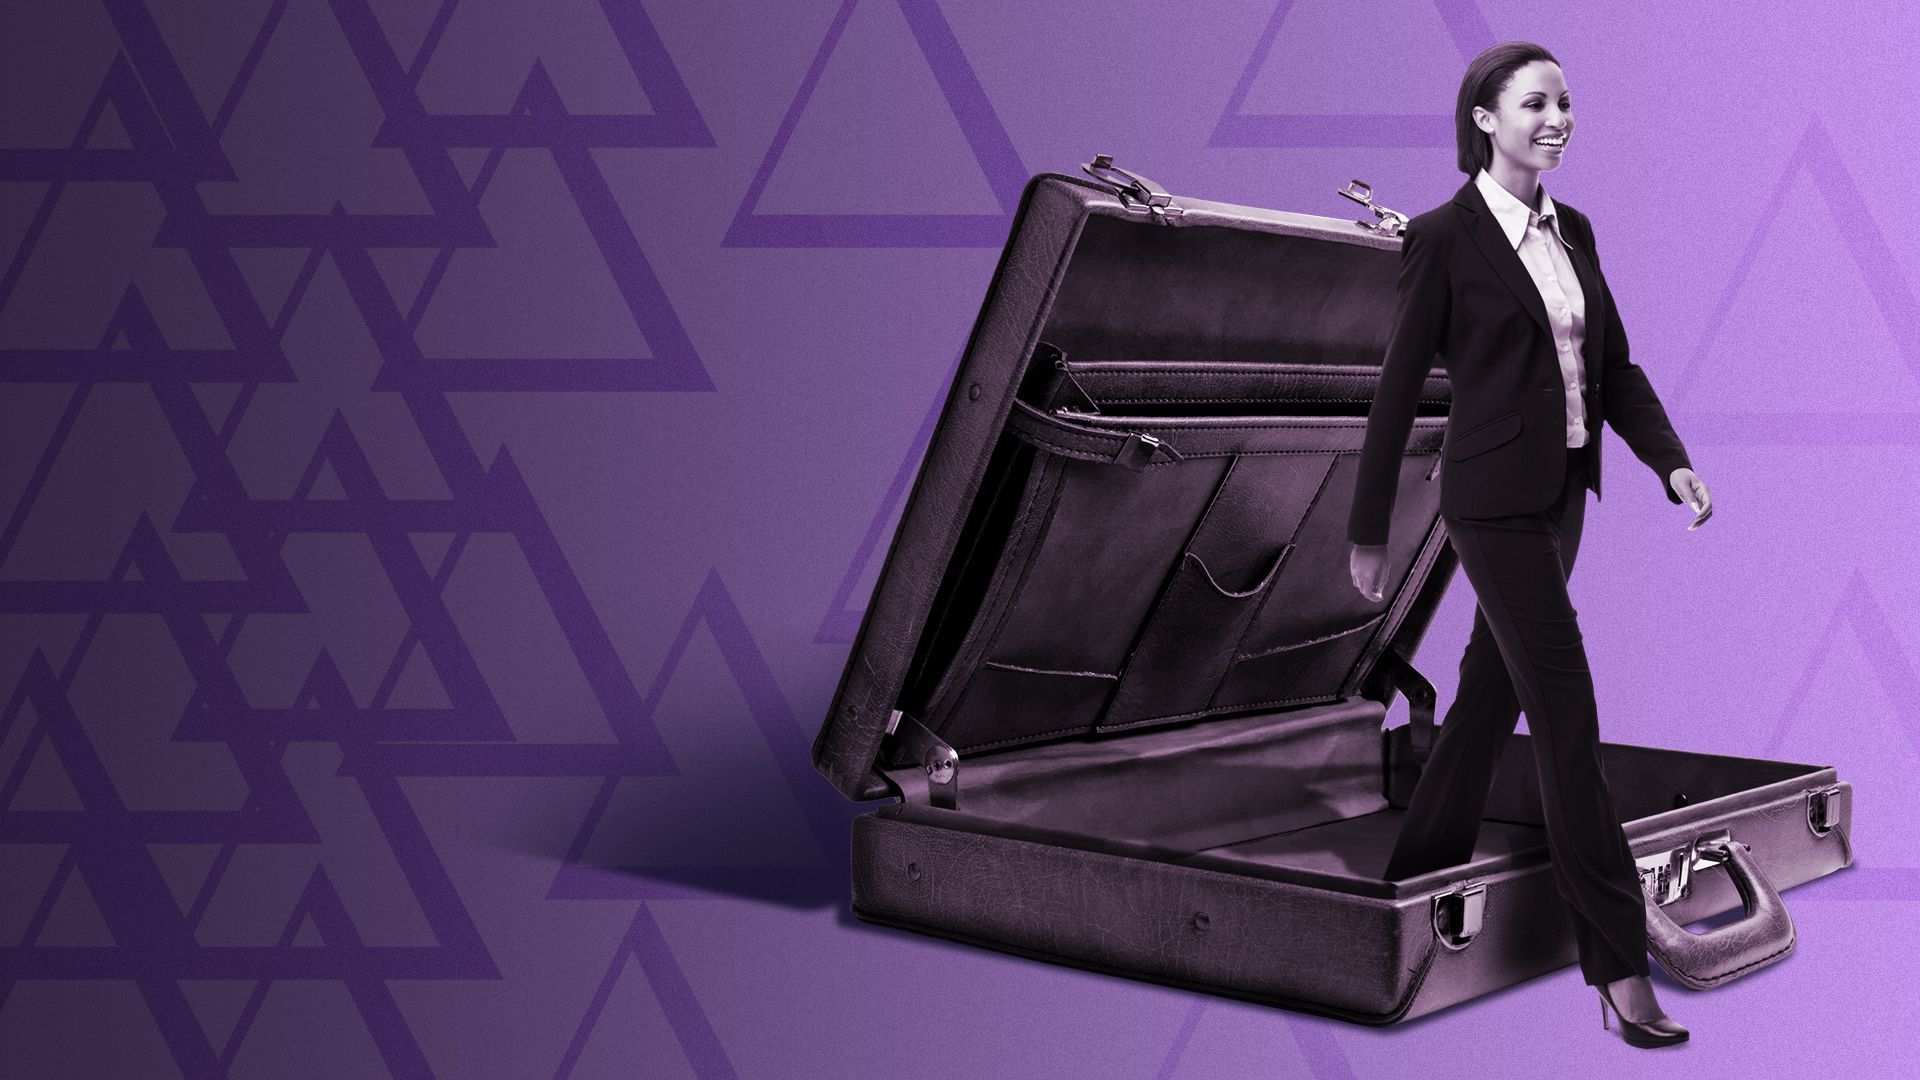 Illustration of a person stepping out of an open briefcase, against a background of delta symbols.